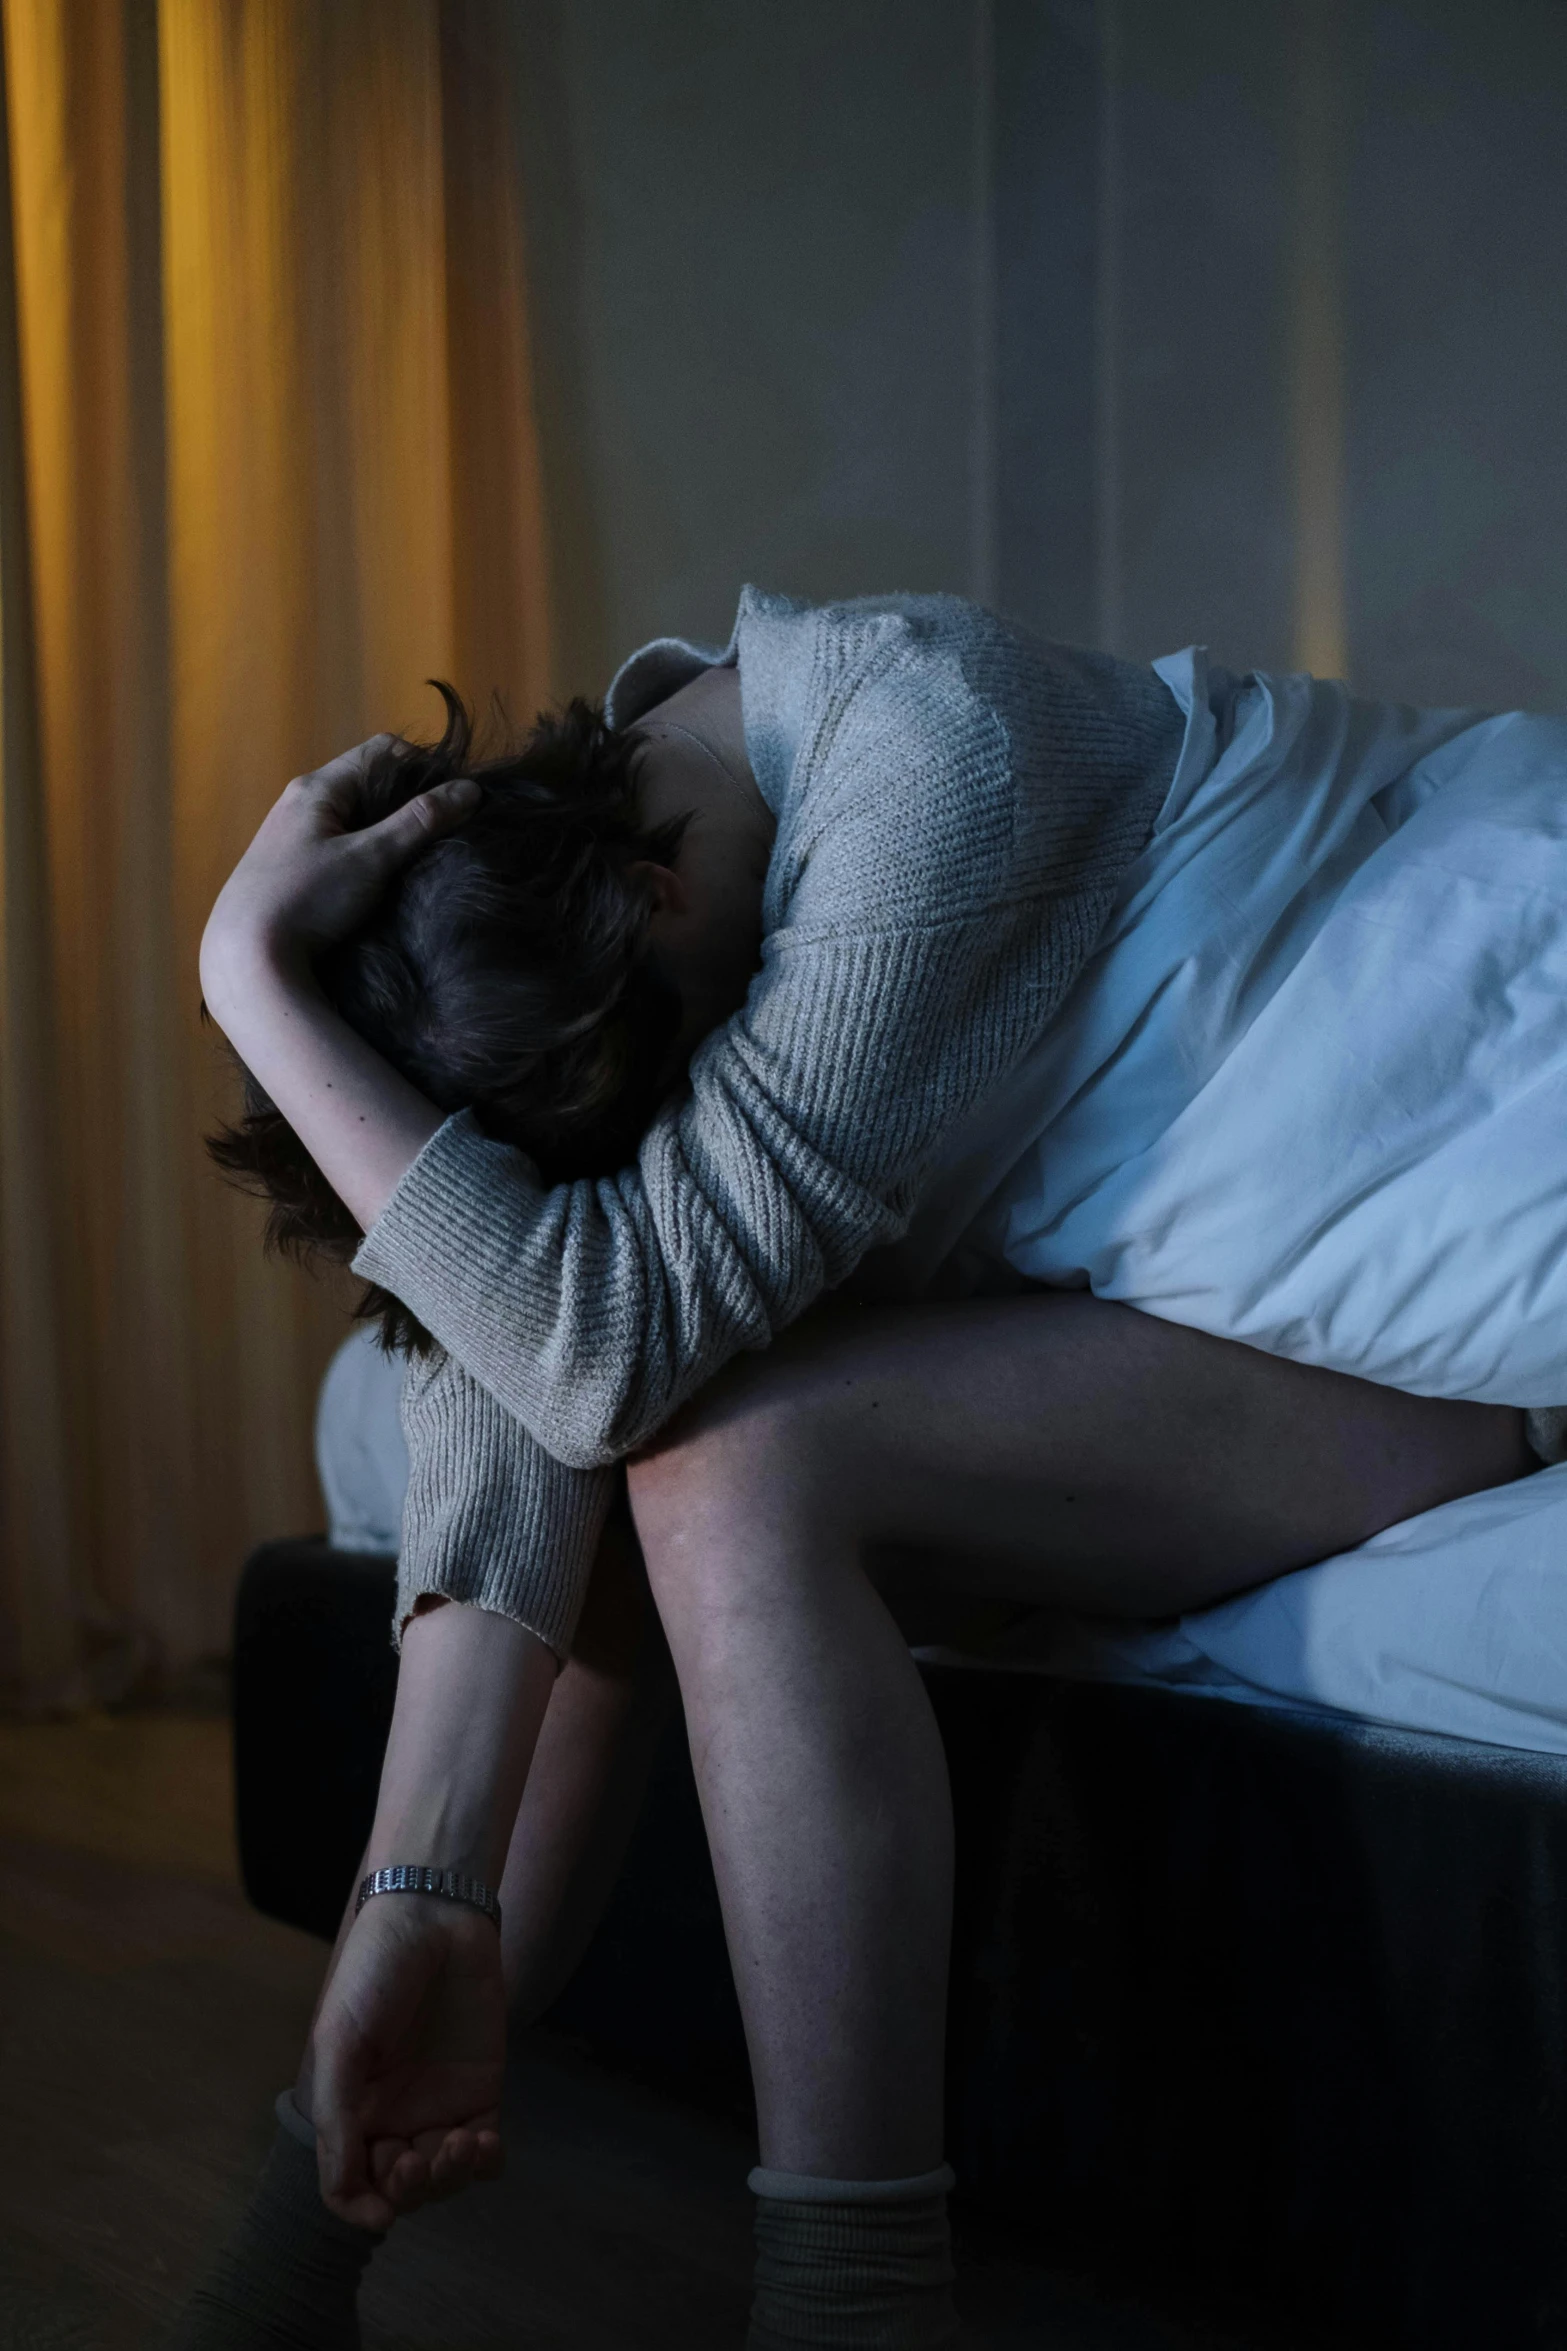 a woman sitting on a bed with her head in her hands, trending on reddit, violence, getty images, hugging her knees, paul barson